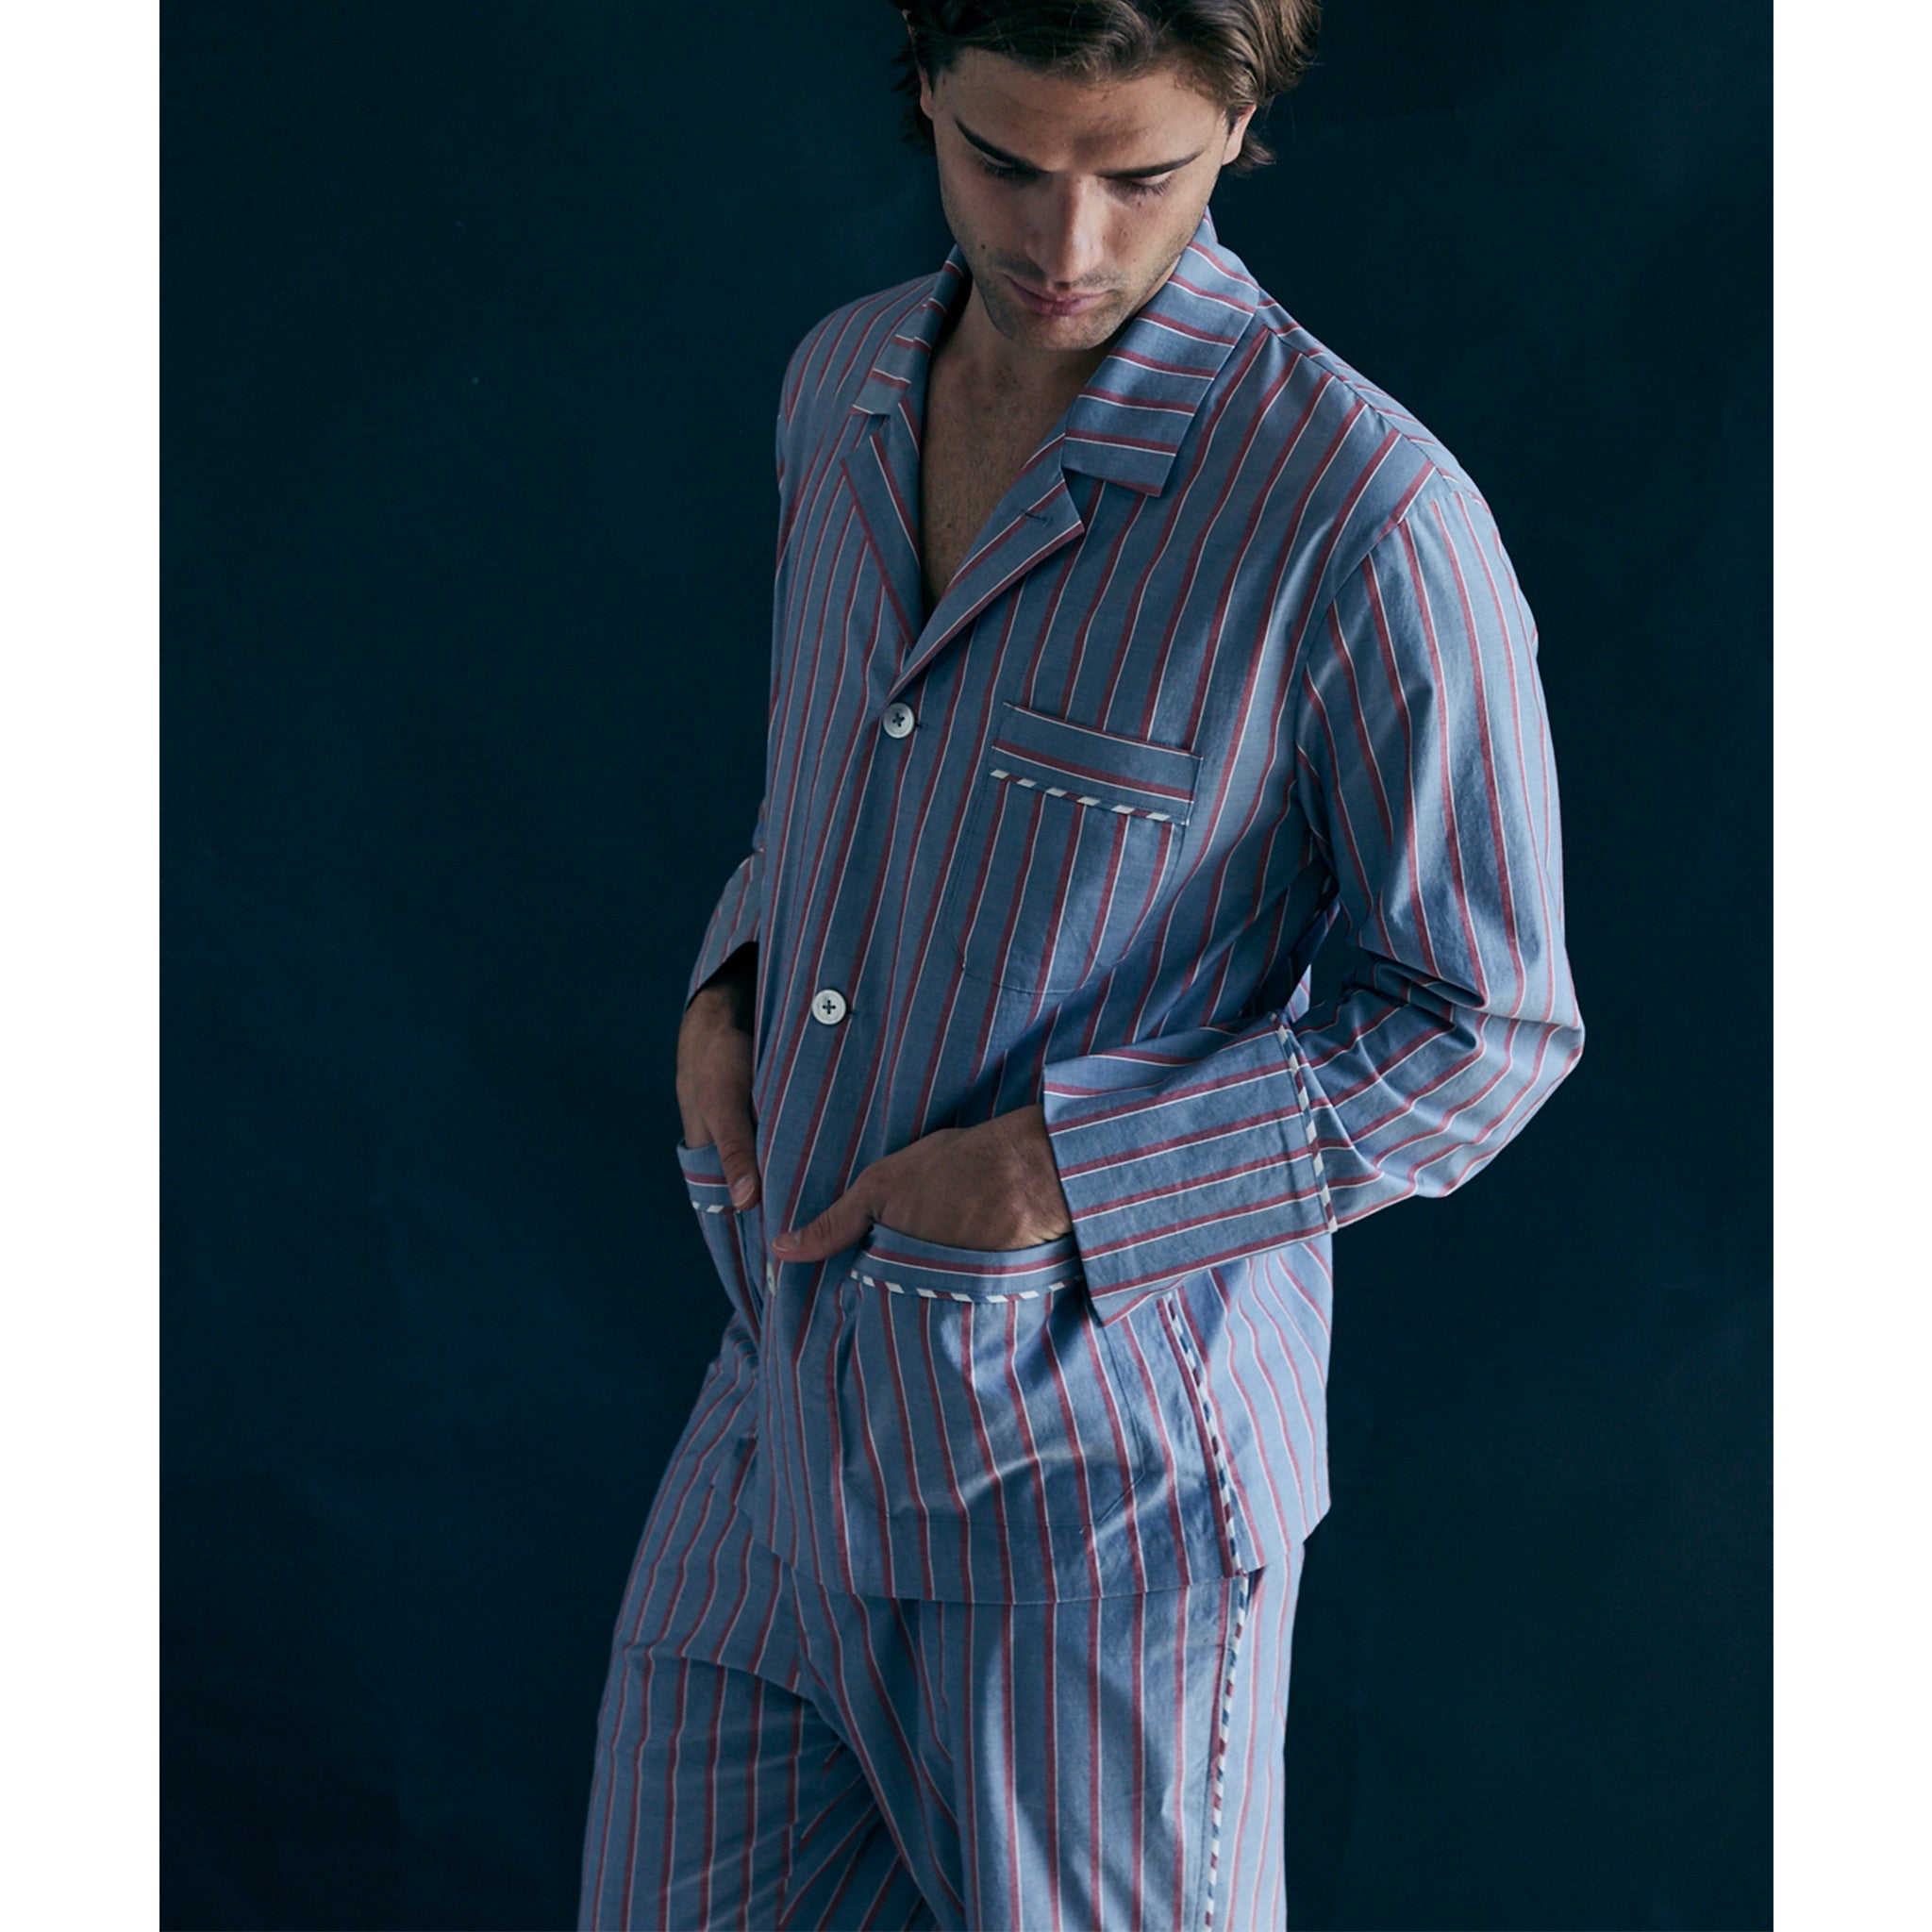 Hyperion Pajama Shirt in Grey with Red Stripe Italian Cotton